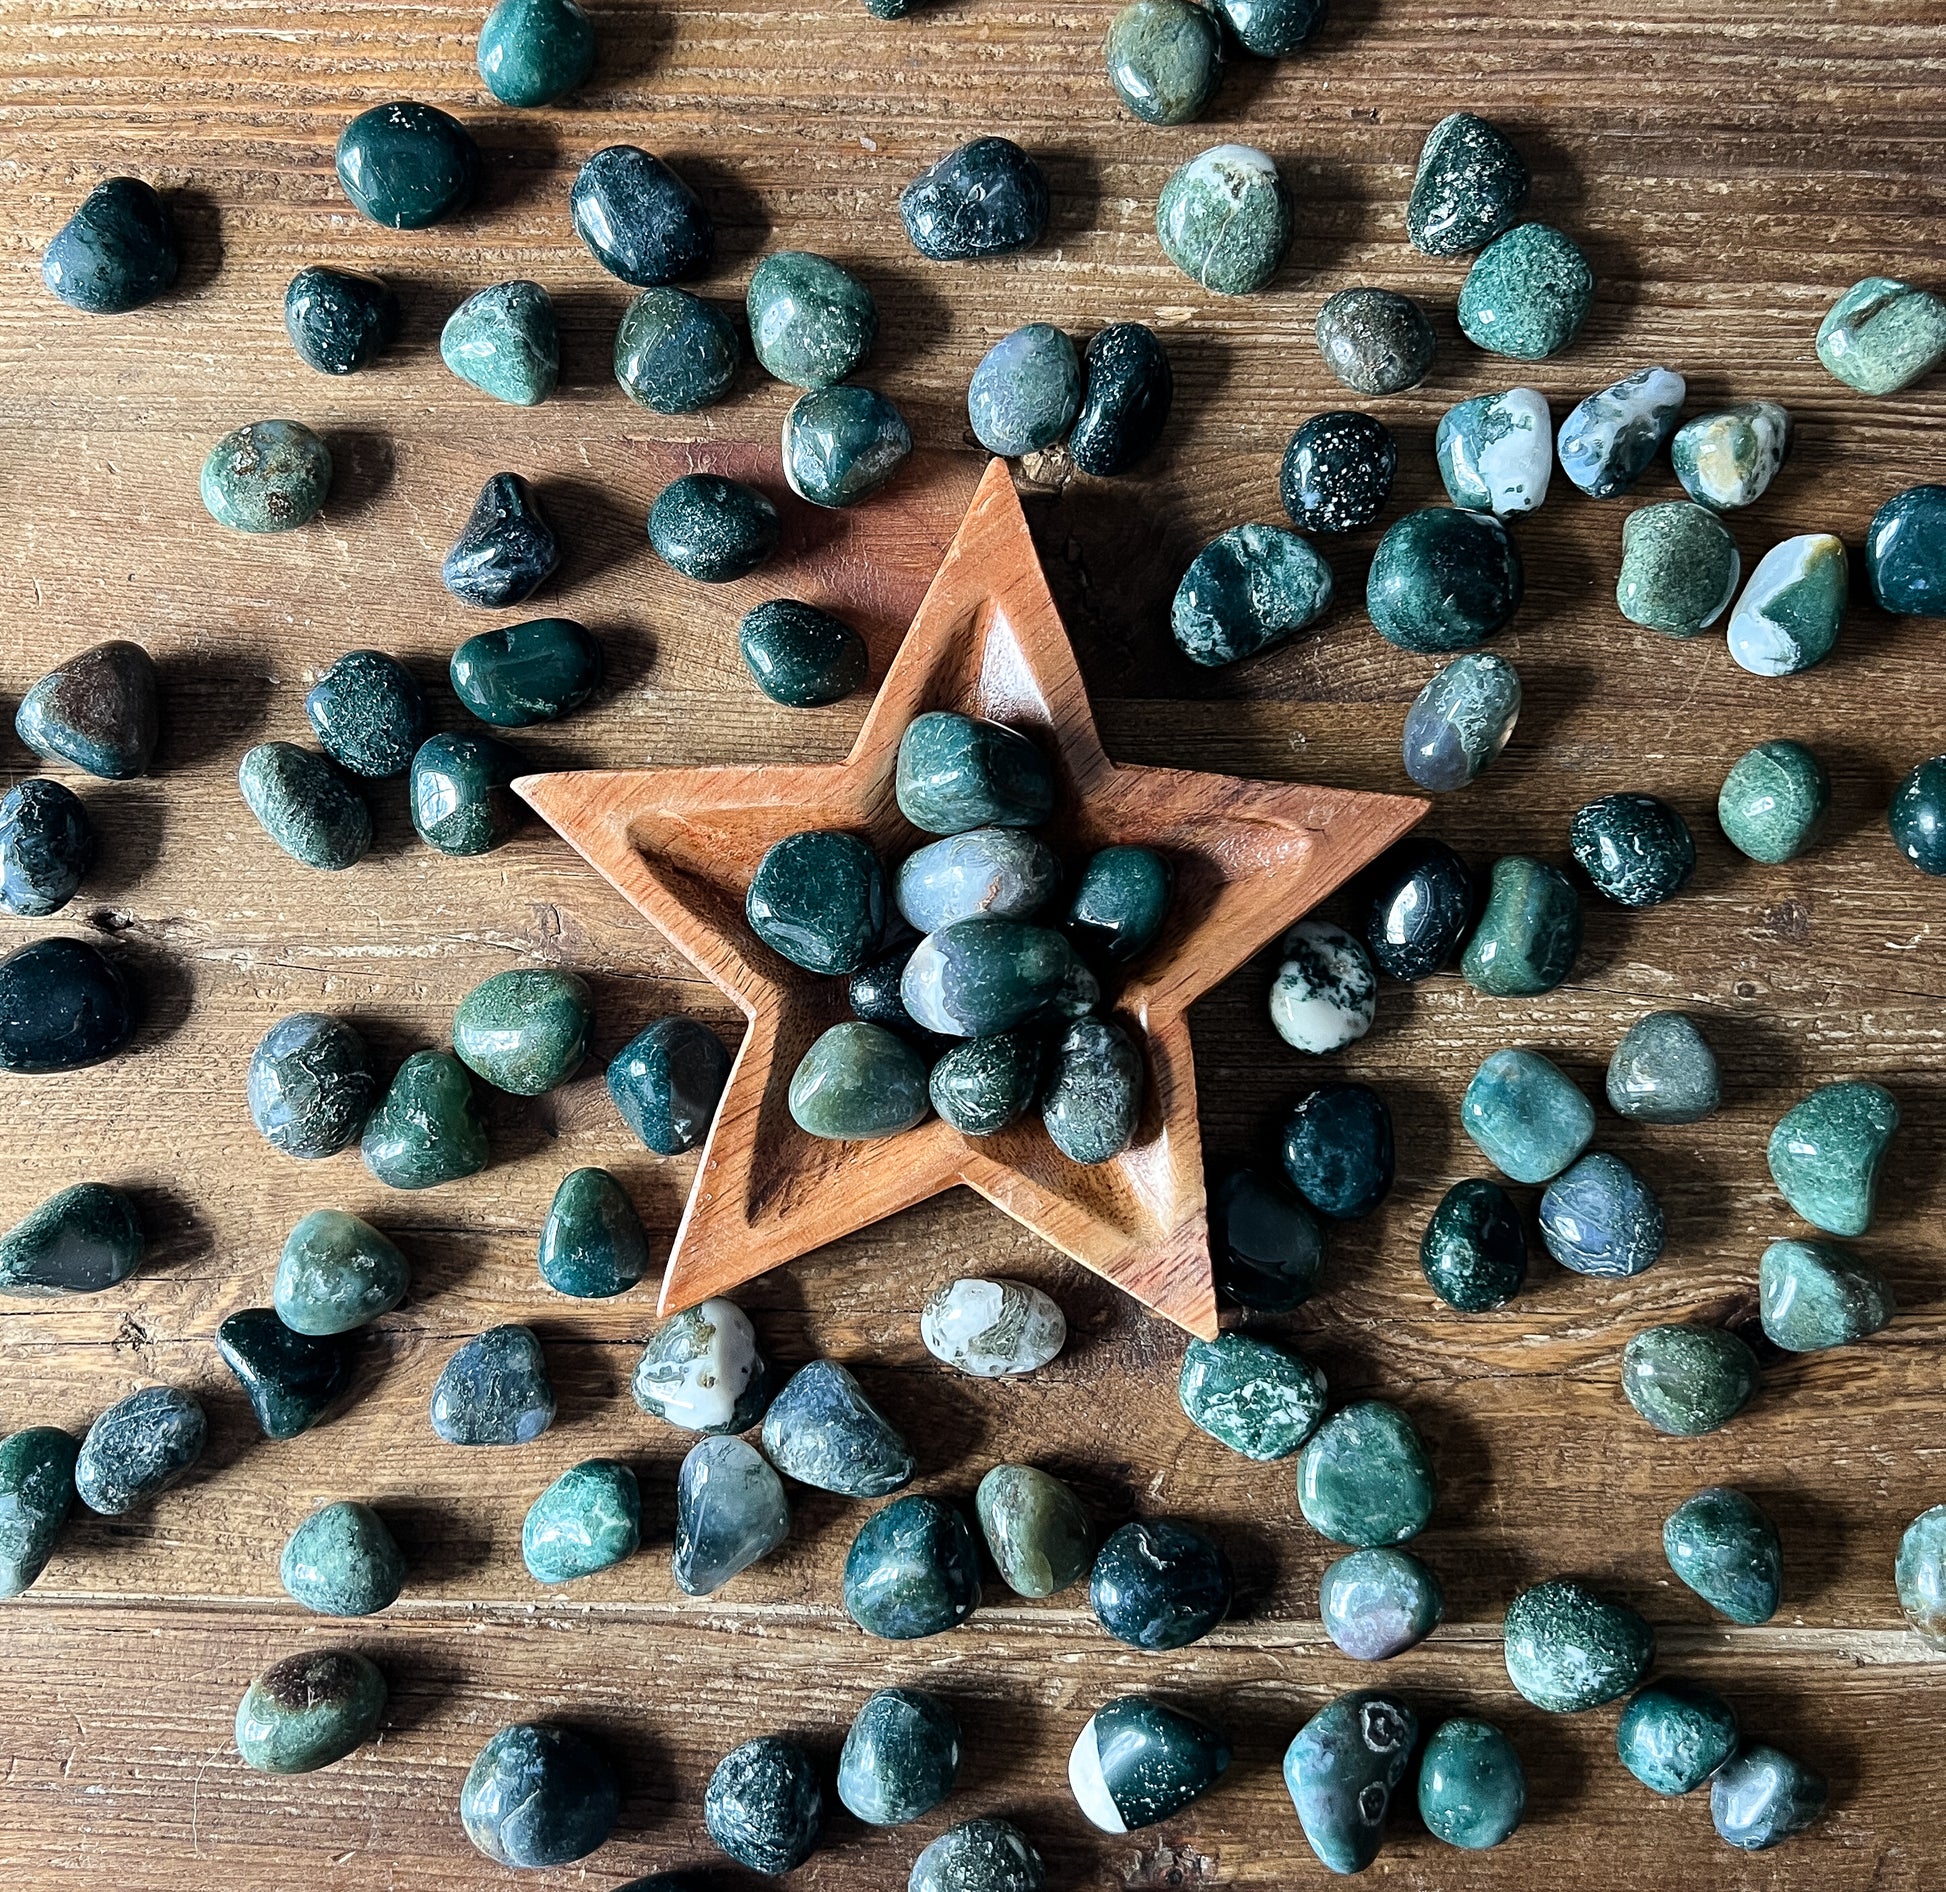 Bulk Green Moss Agate Tumbled Stones at The Stone Maidens